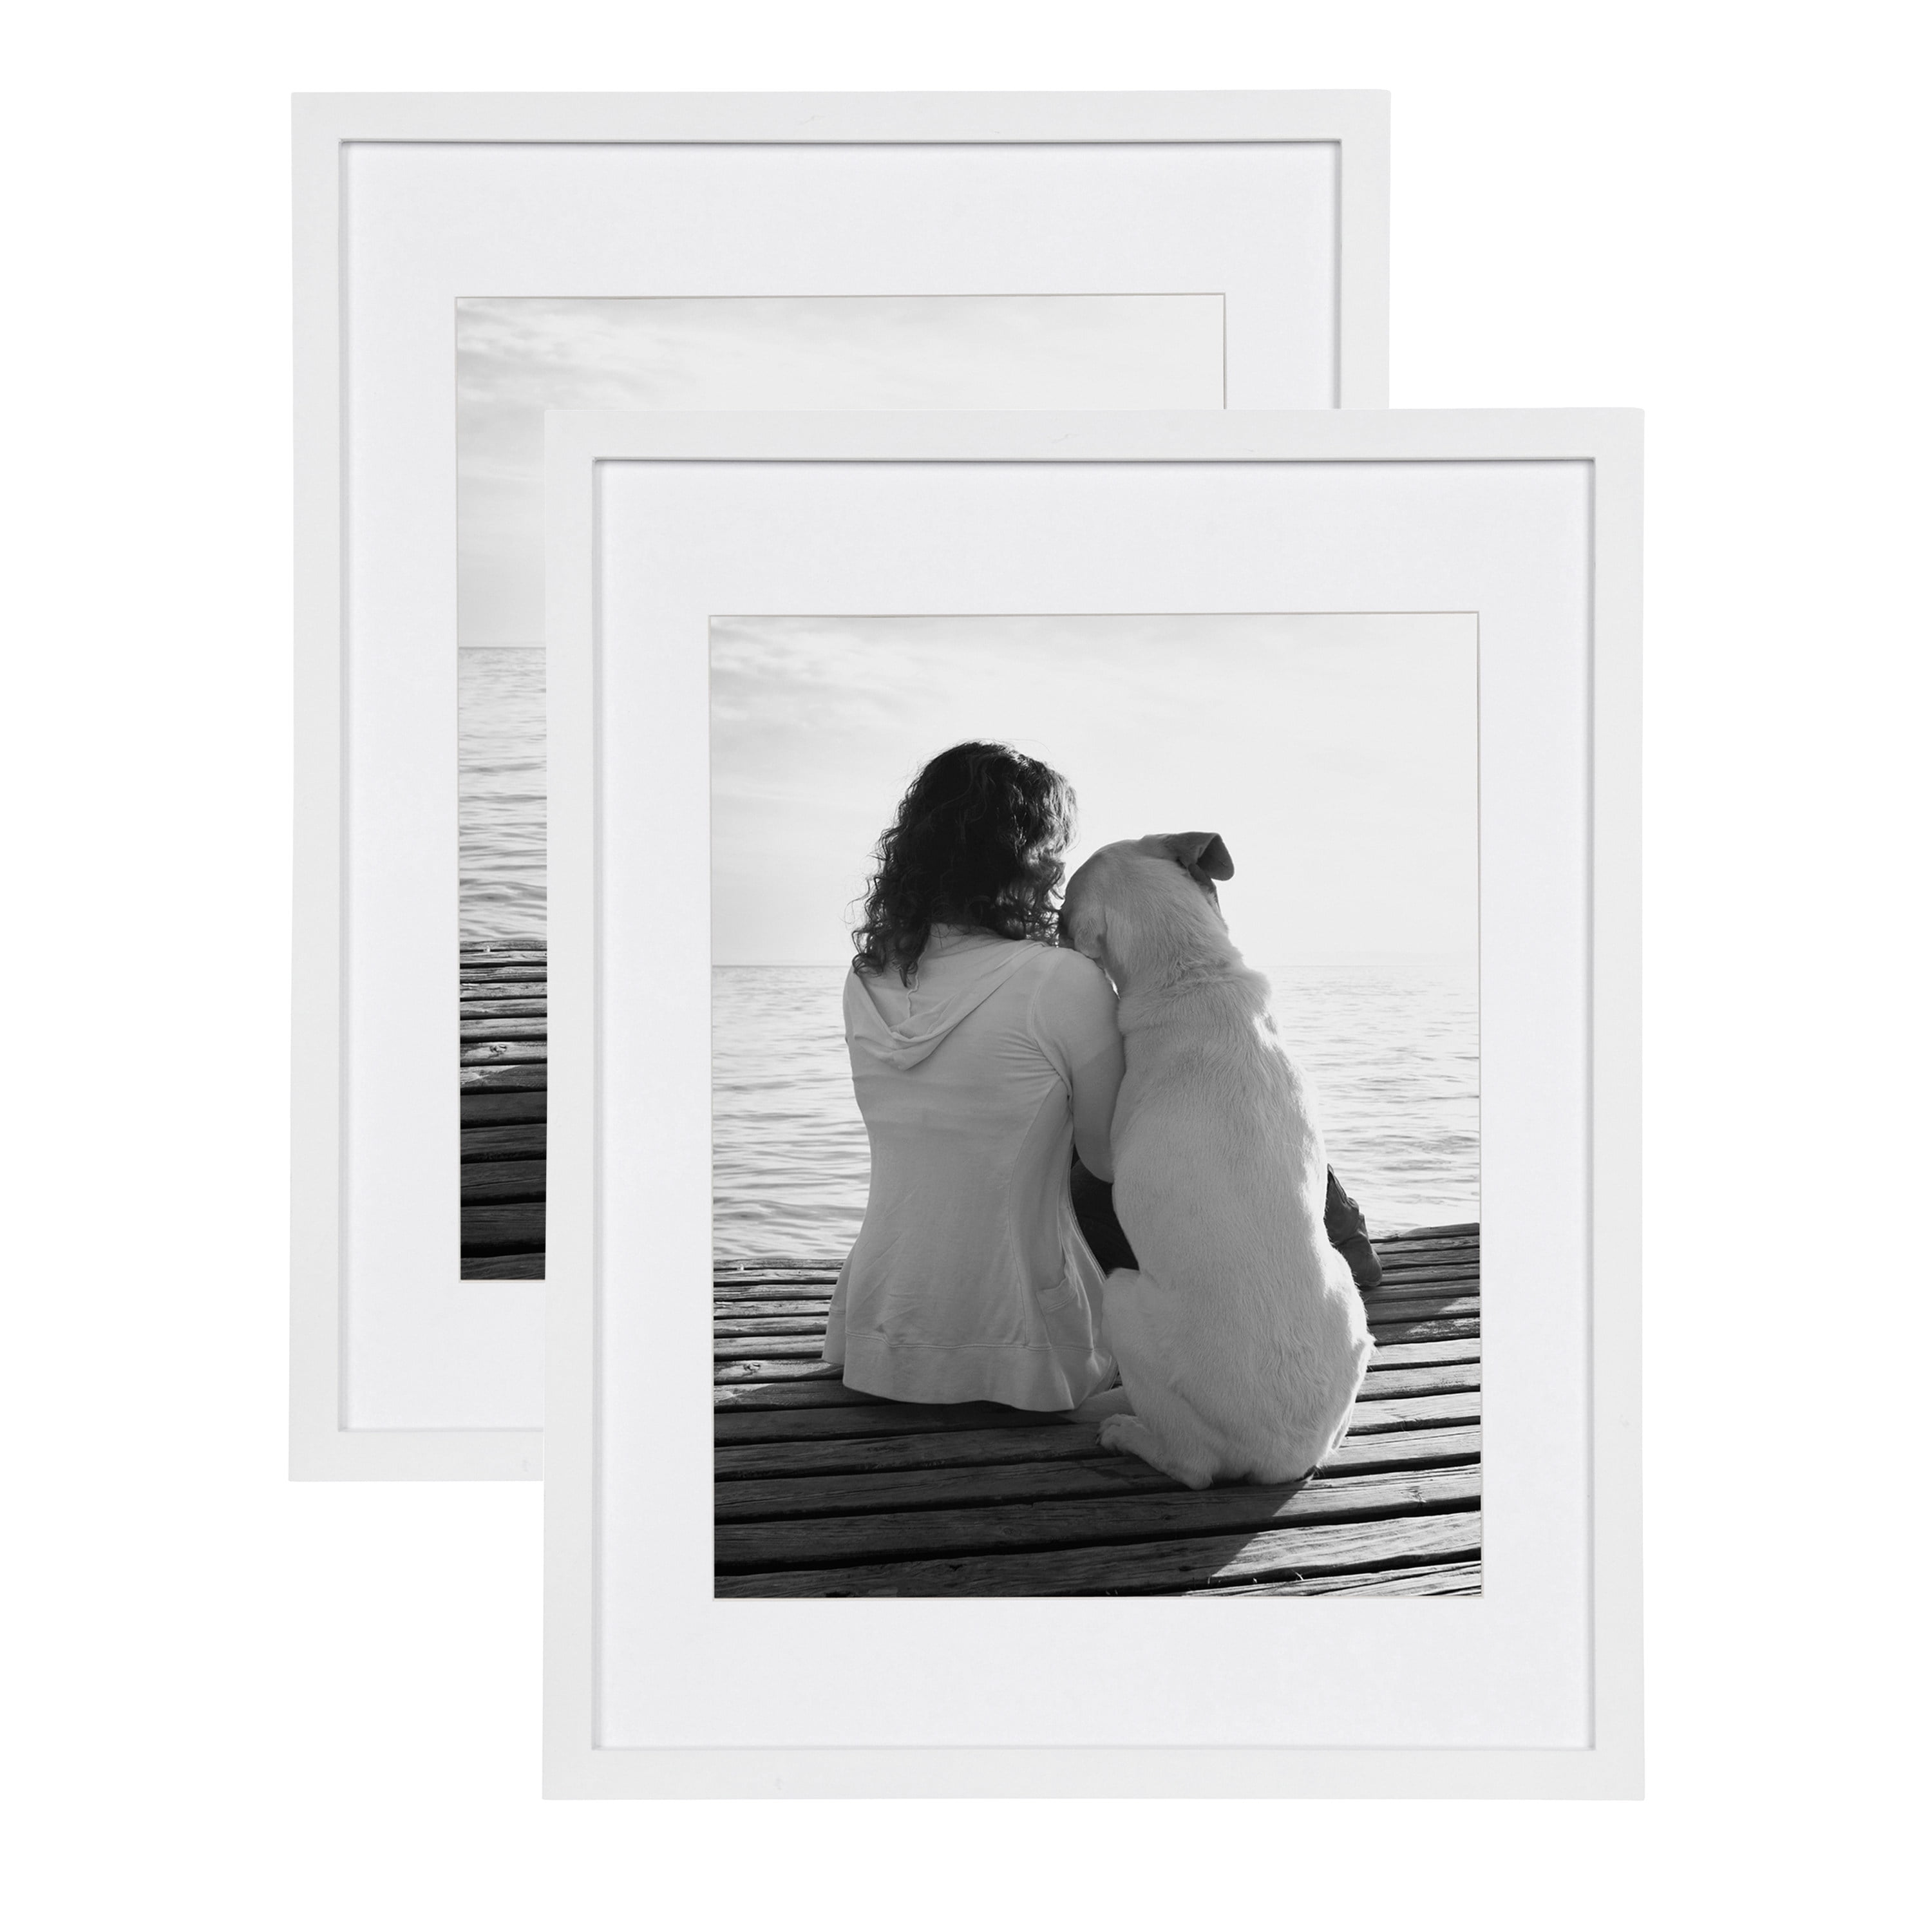 Matte-Black GALLERY-CANVAS DEPTH matted wood 14x18/11x14 frame by  Nielsen-Bainbridge® - Picture Frames, Photo Albums, Personalized and  Engraved Digital Photo Gifts - SendAFrame